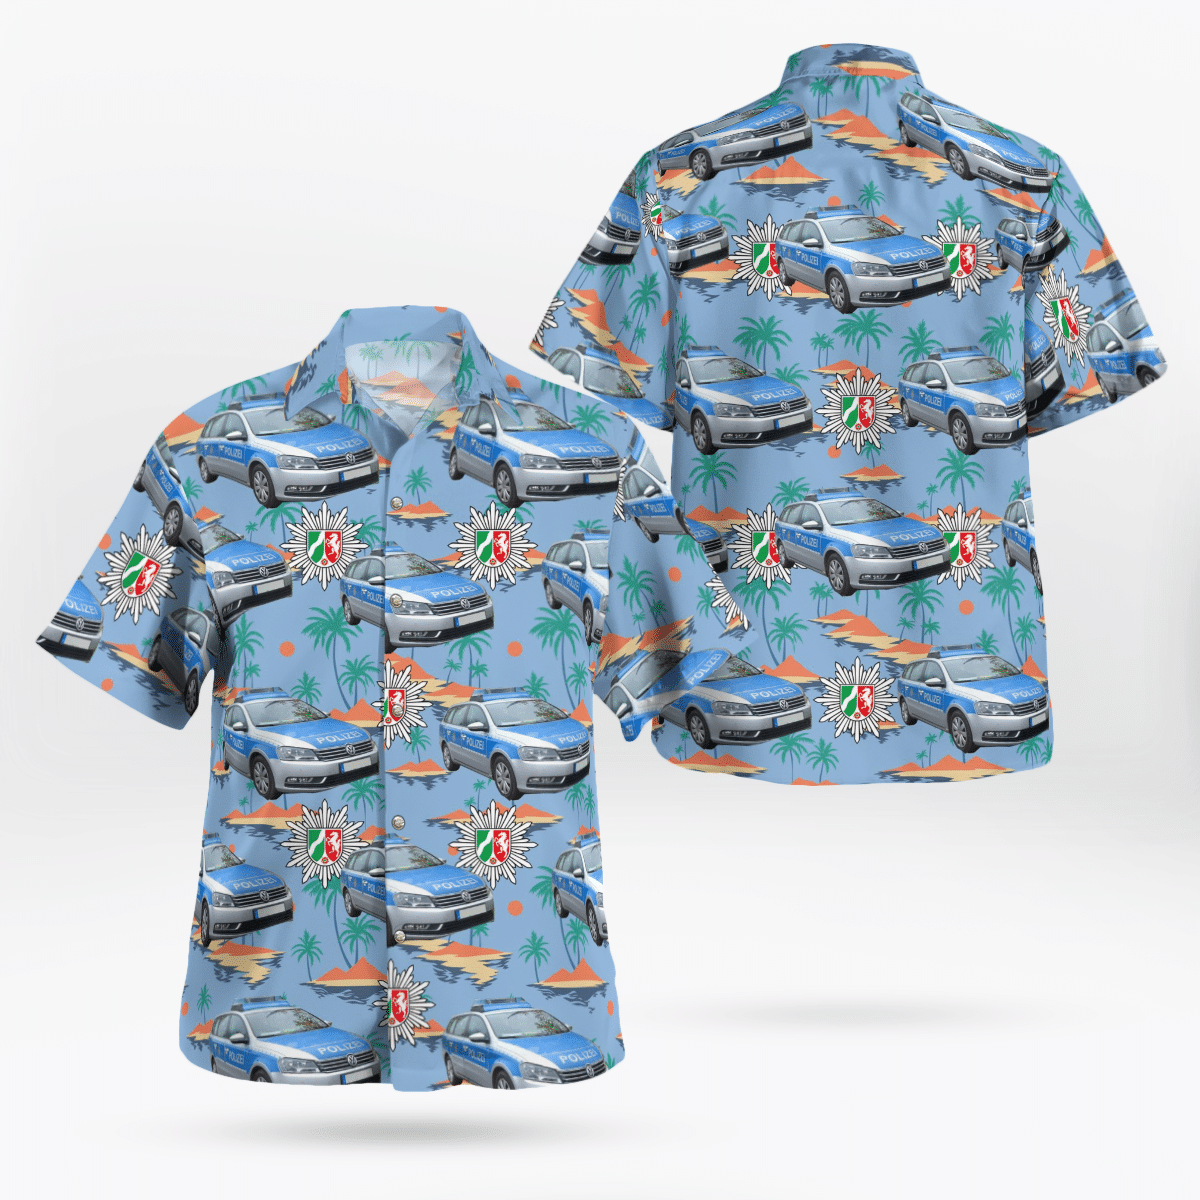 If you are in need of a new summertime look, pick up this Hawaiian shirt 188